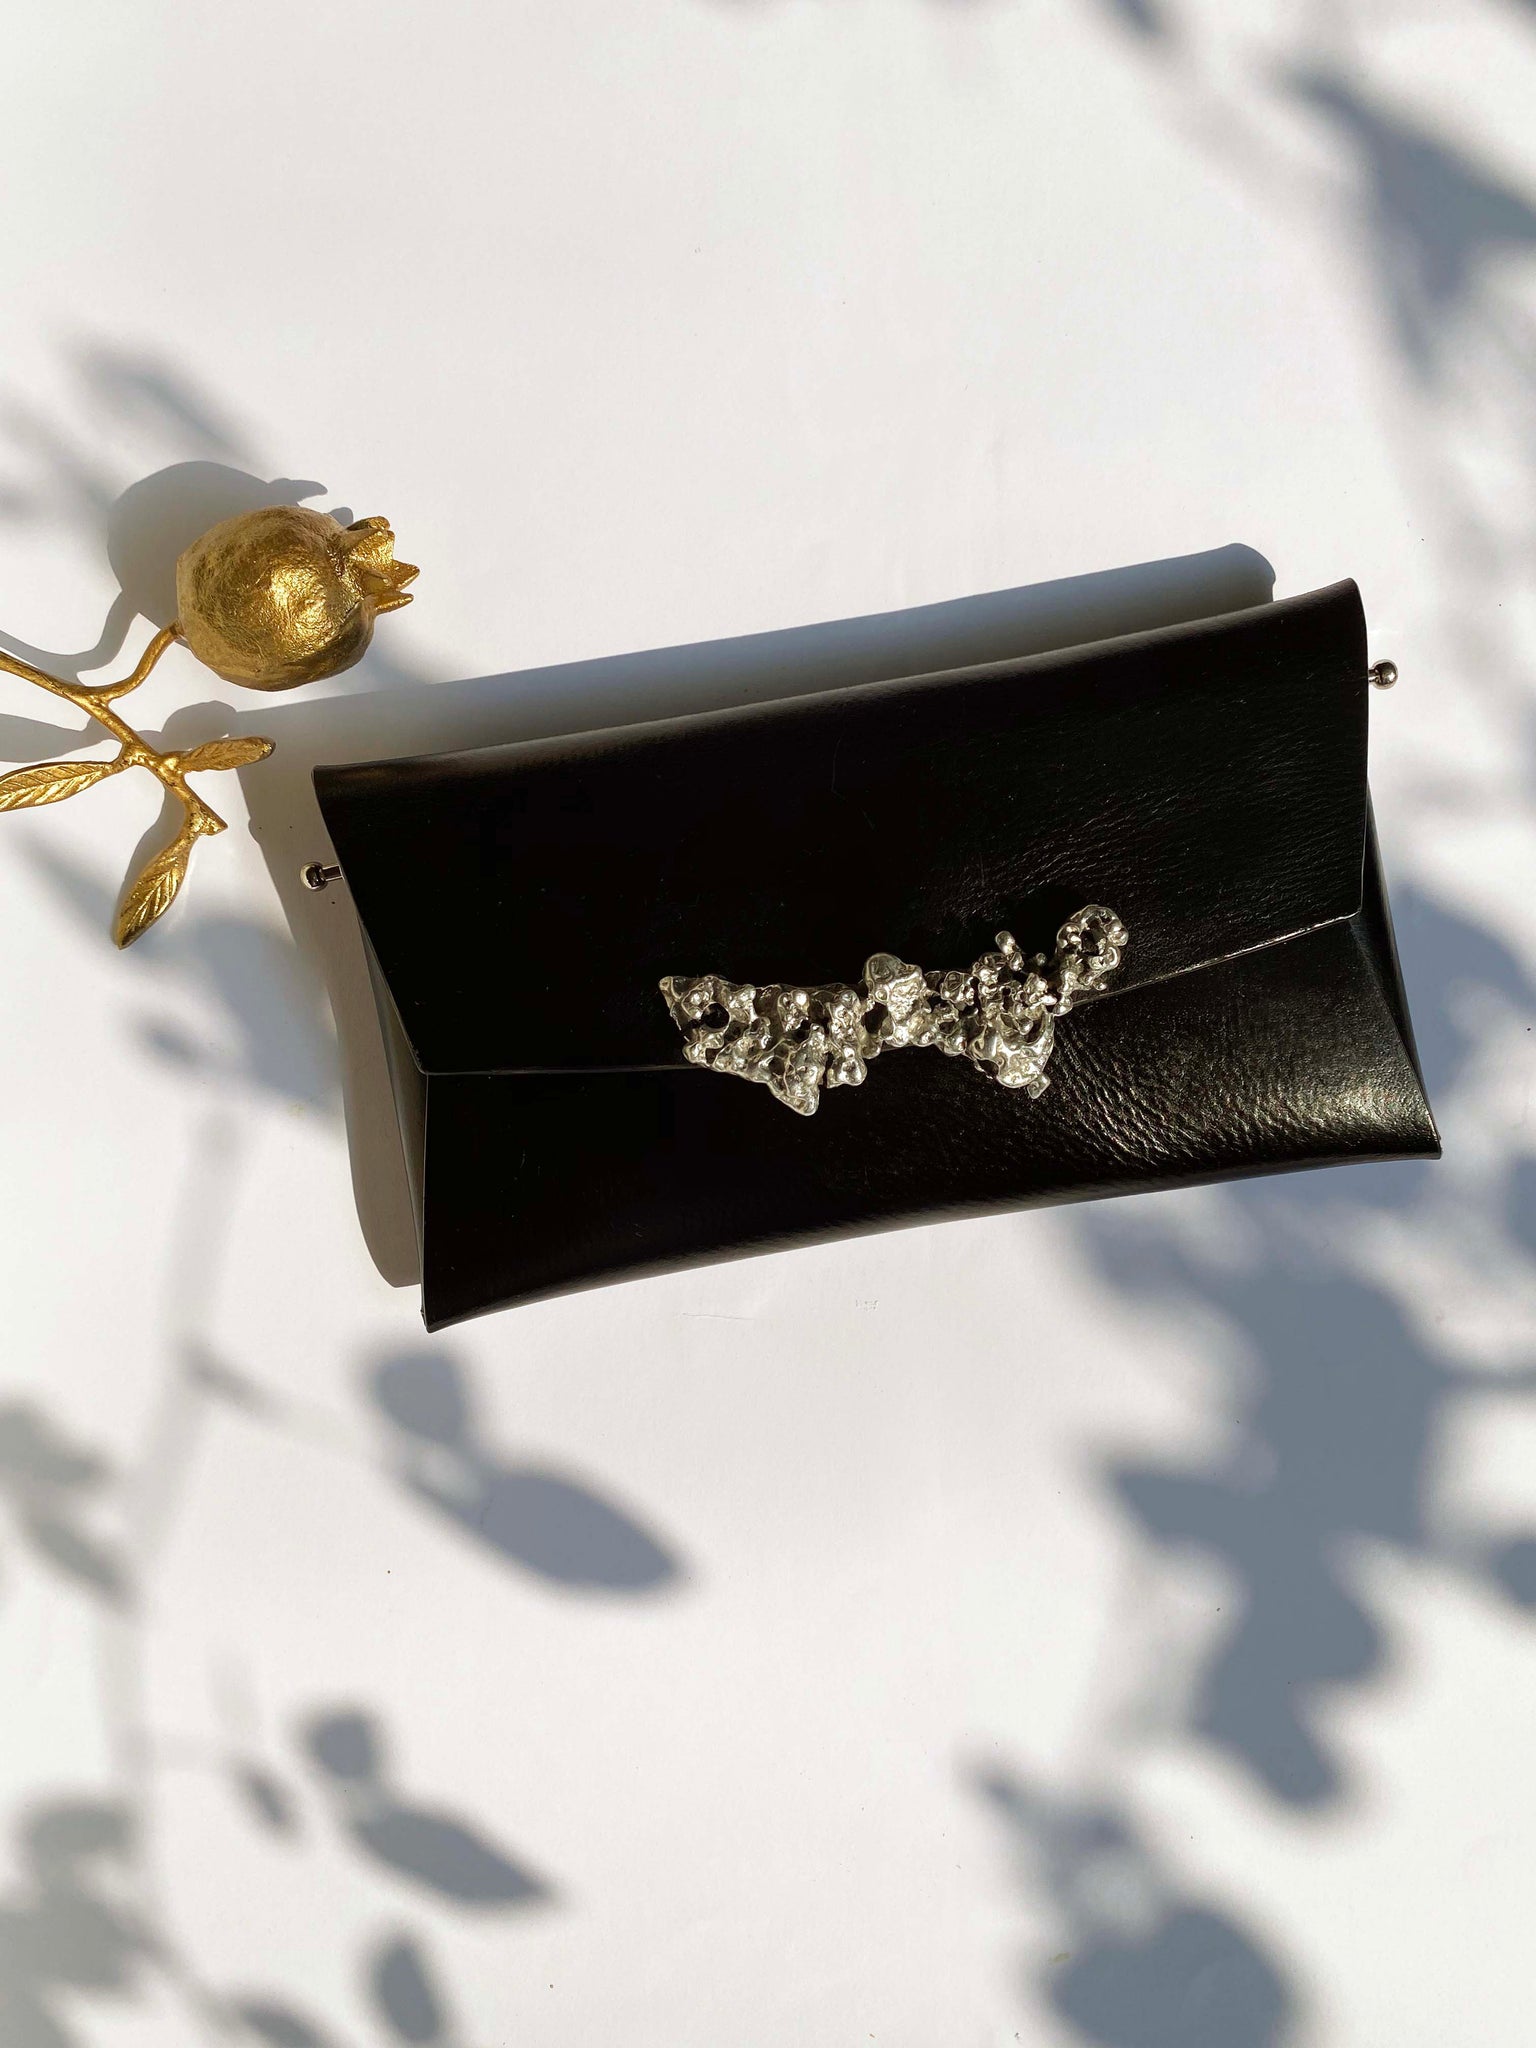 The Alum Stone Clutch - Limited Edition